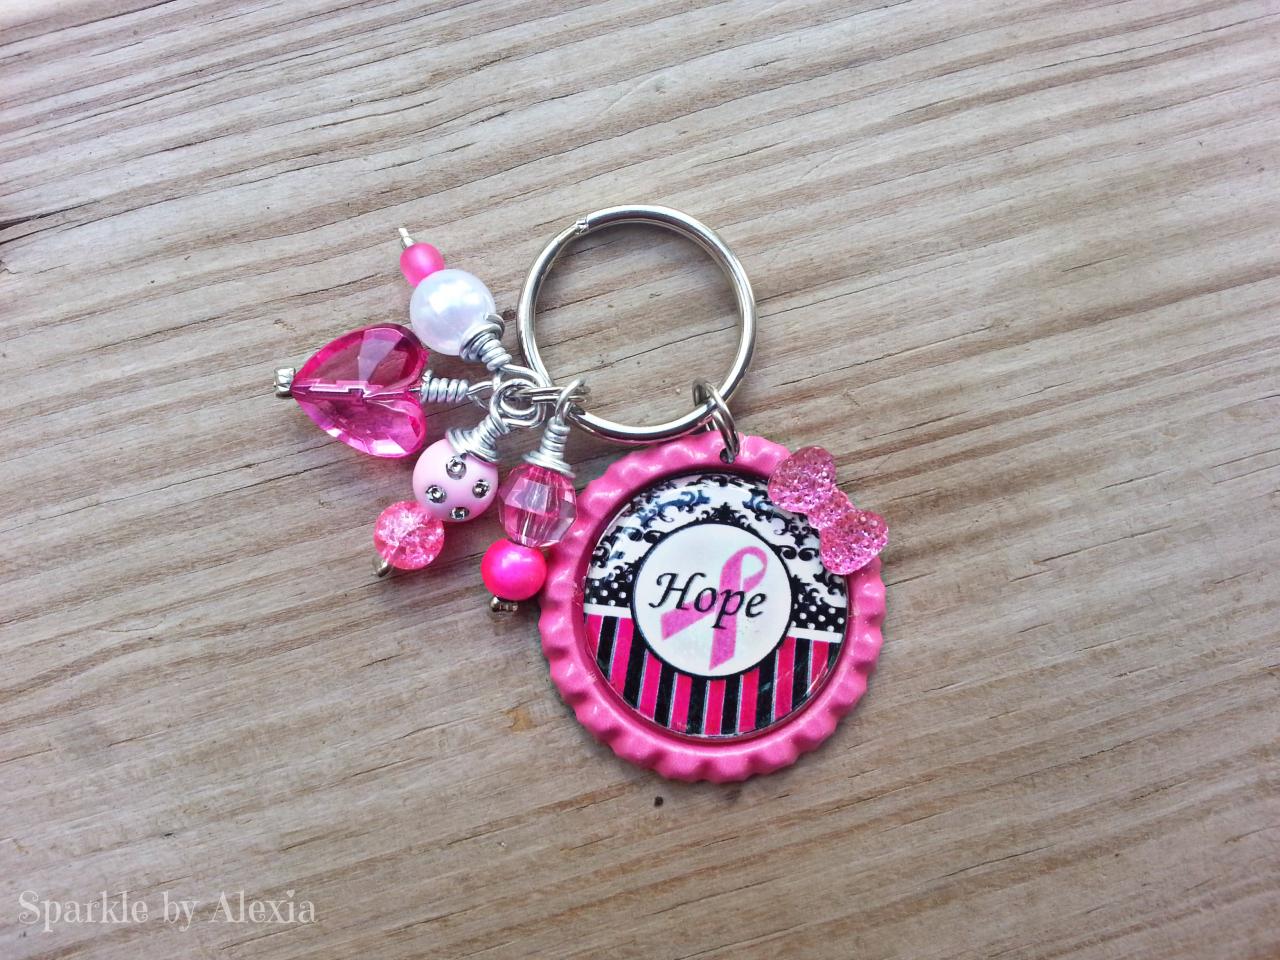 Breast Cancer Awareness Key Chain